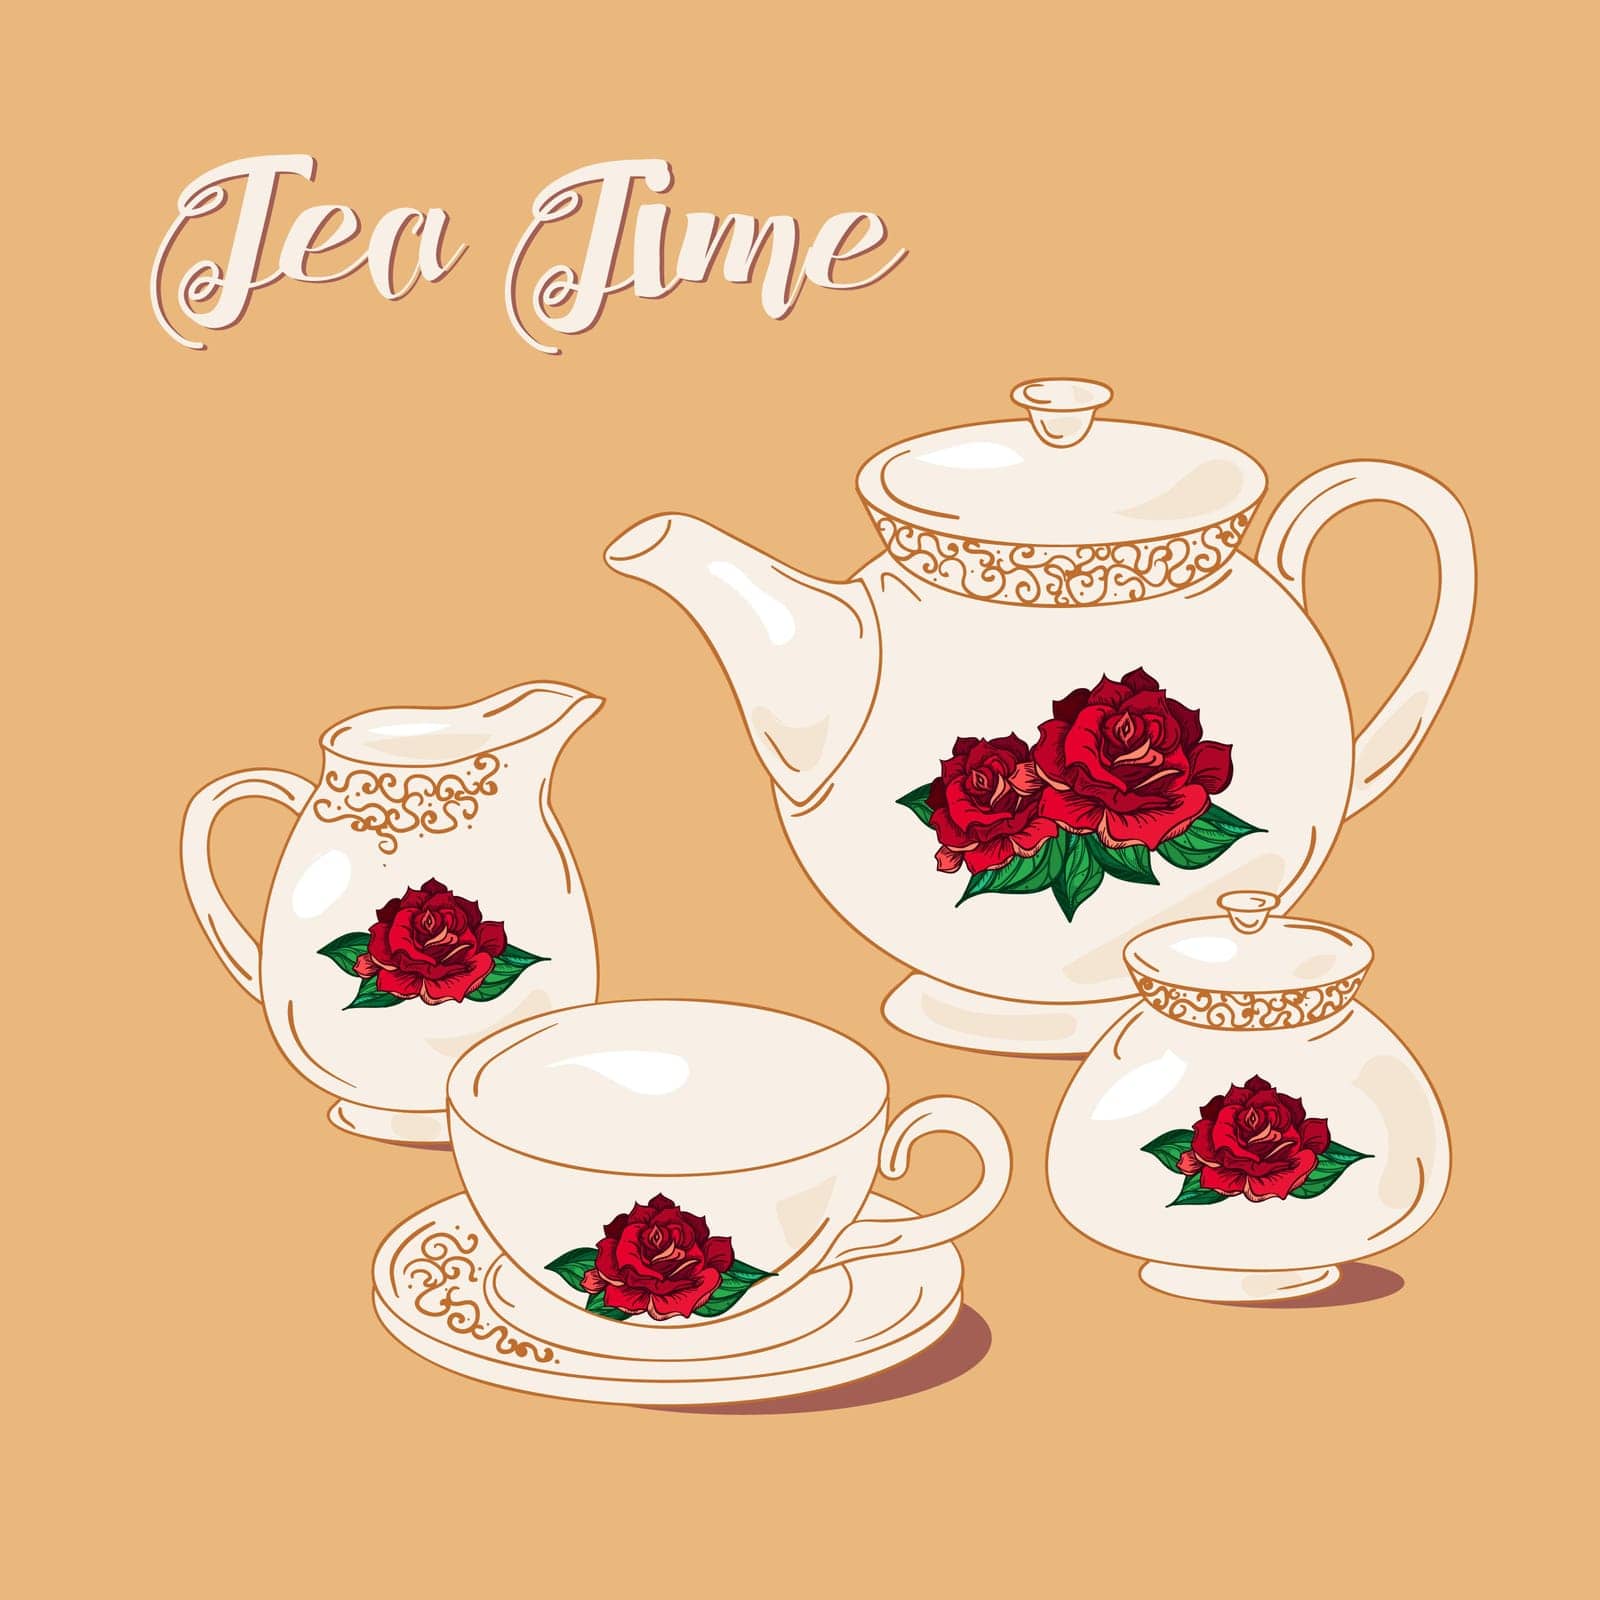 Tea Time and Tea Set in vintage style. Traditional english tea with floral dishware from rose. Vector